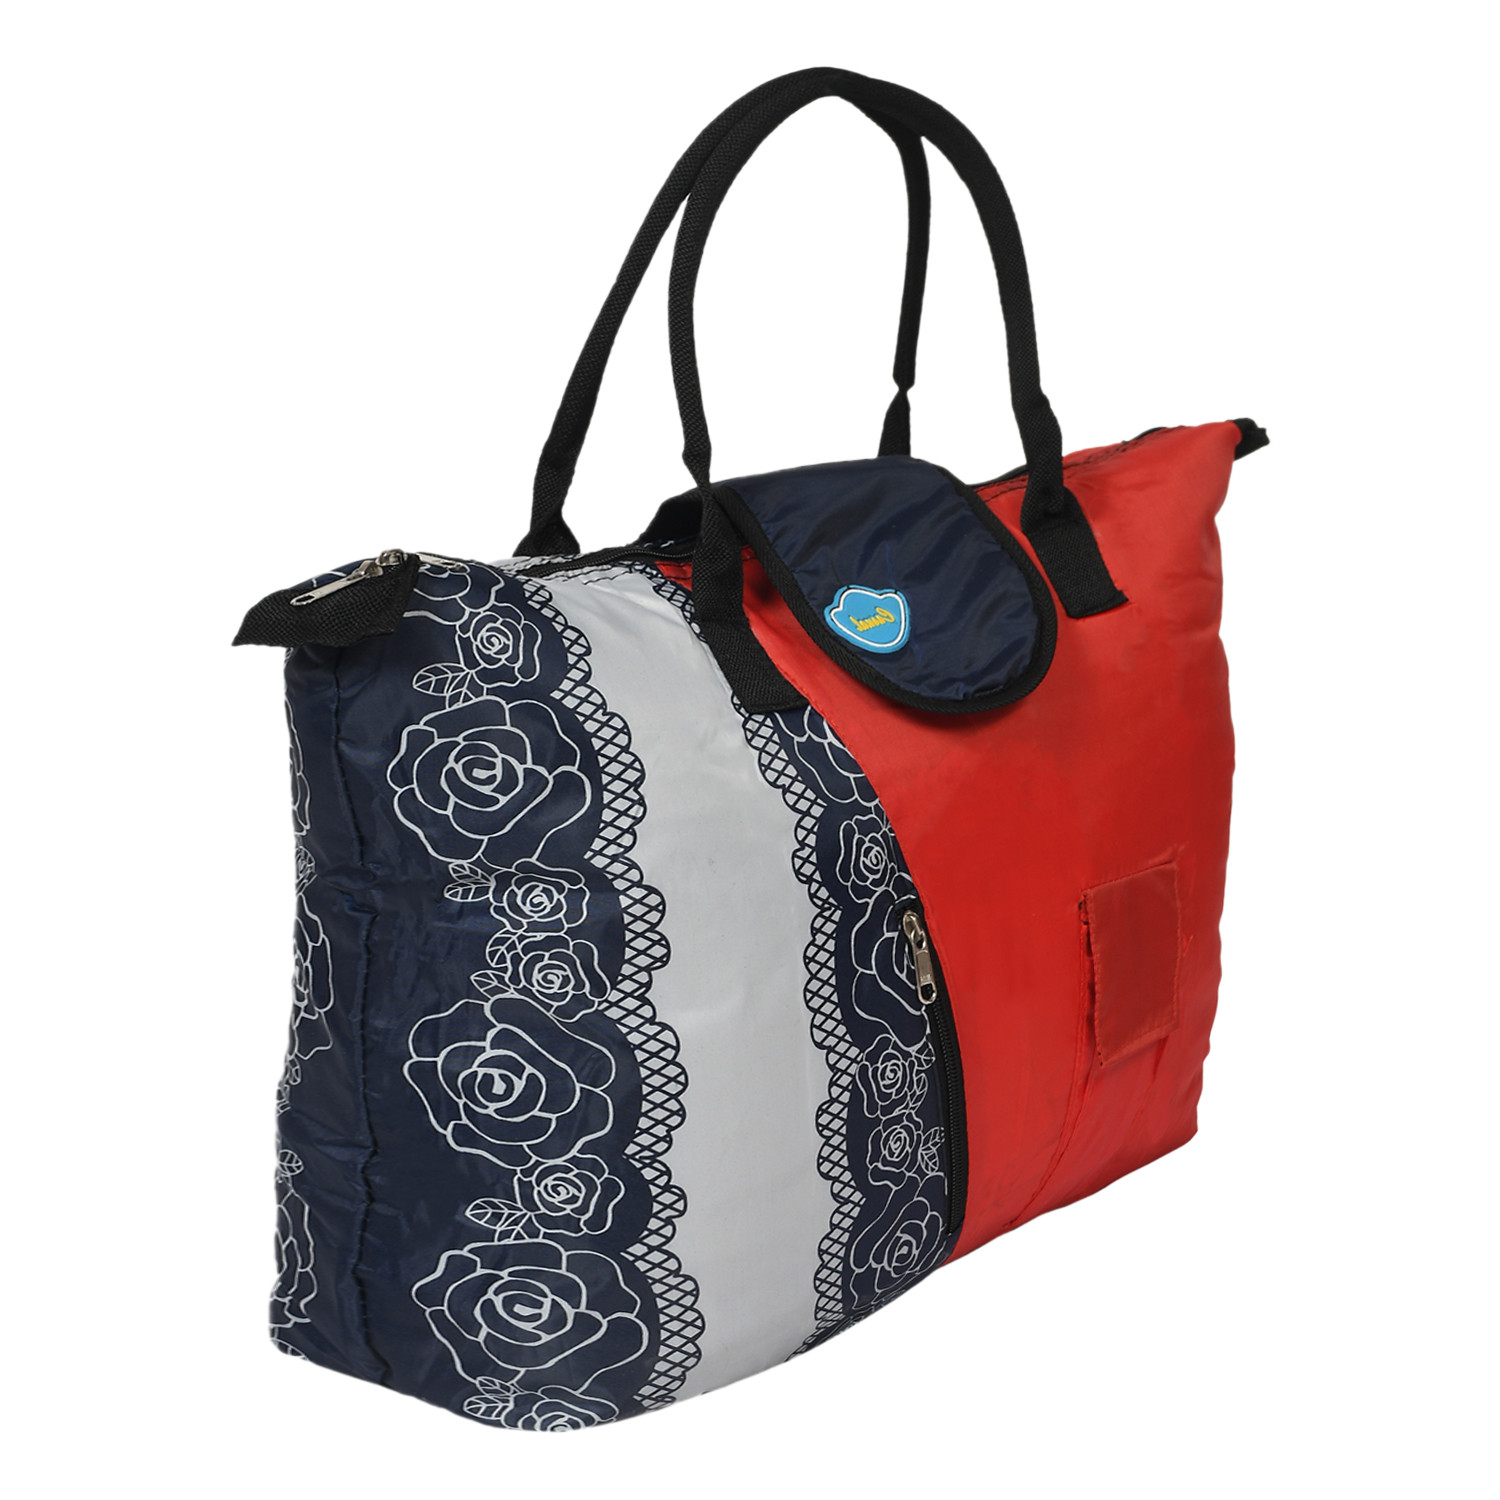 Kuber Industries Parachute Floral Print Shoulder Bag/Shopping Bag For Home & Travling With Handle (Red) 54KM4192